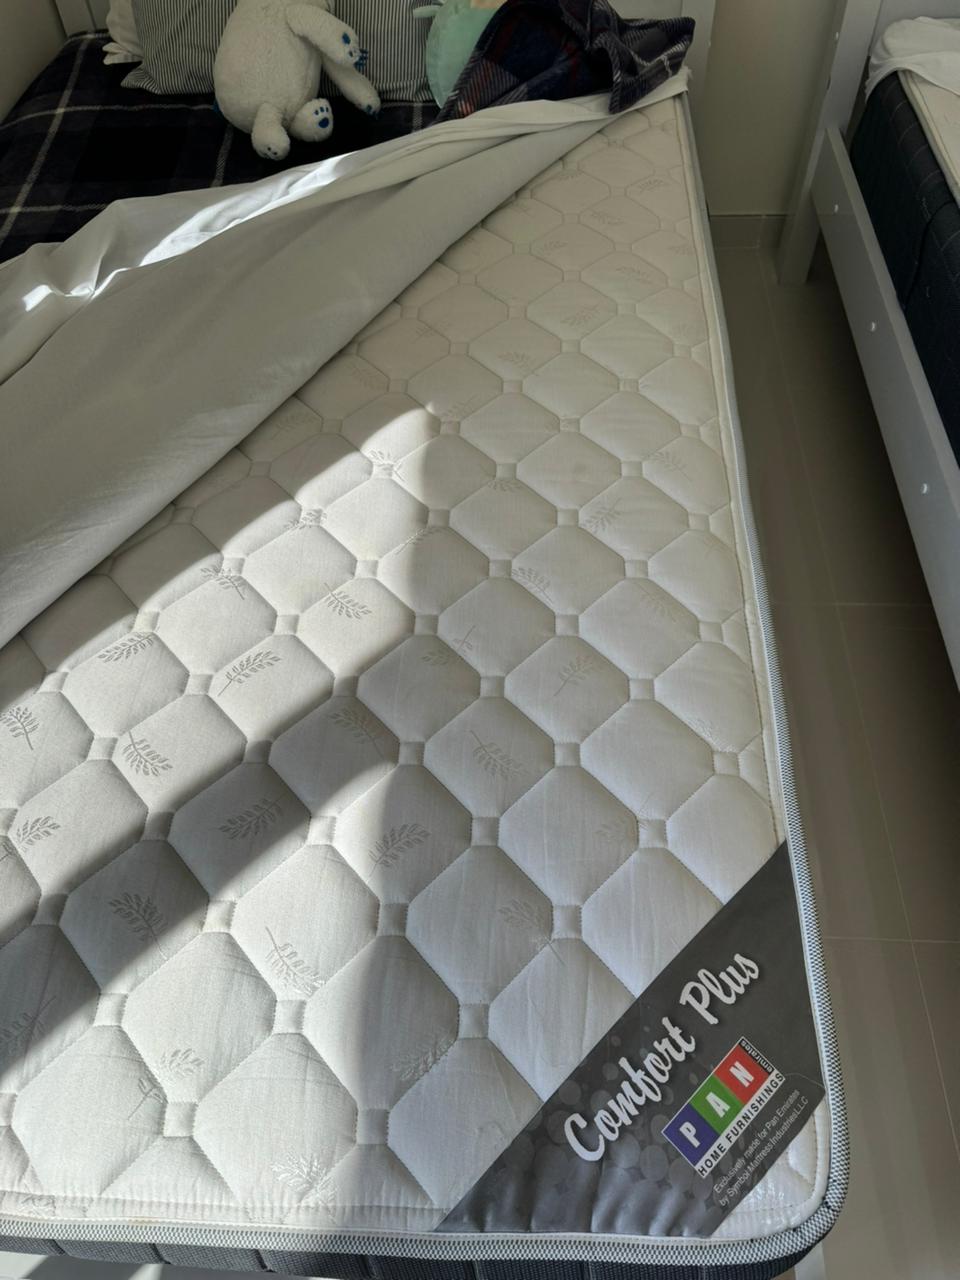 Single bed with mattress